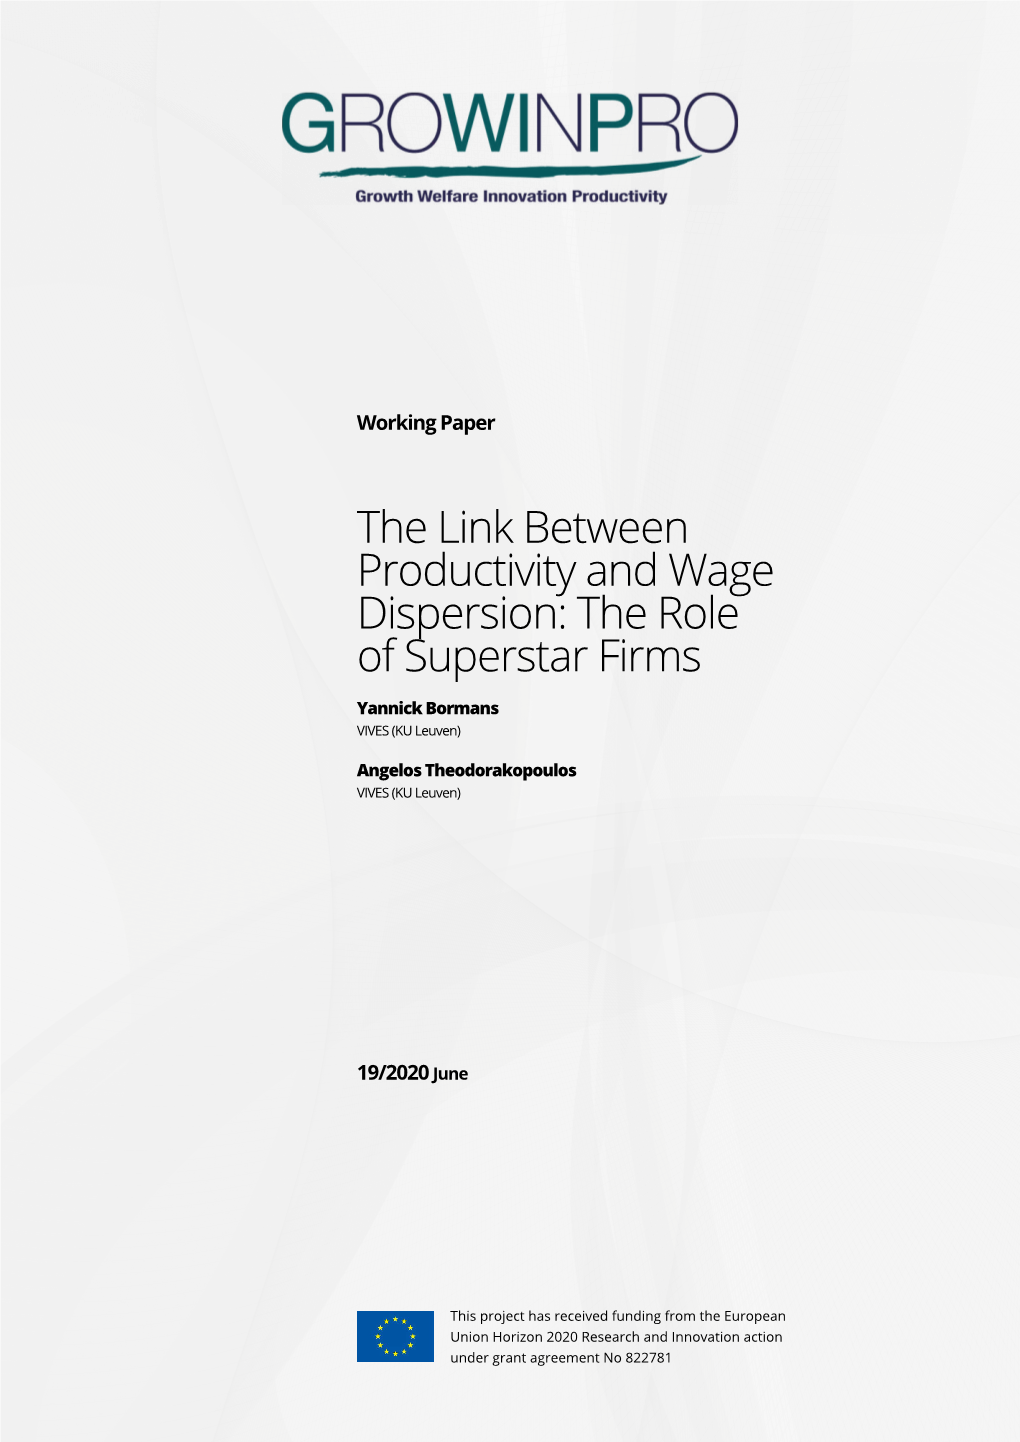 The Link Between Productivity and Wage Dispersion: the Role of Superstar Firms